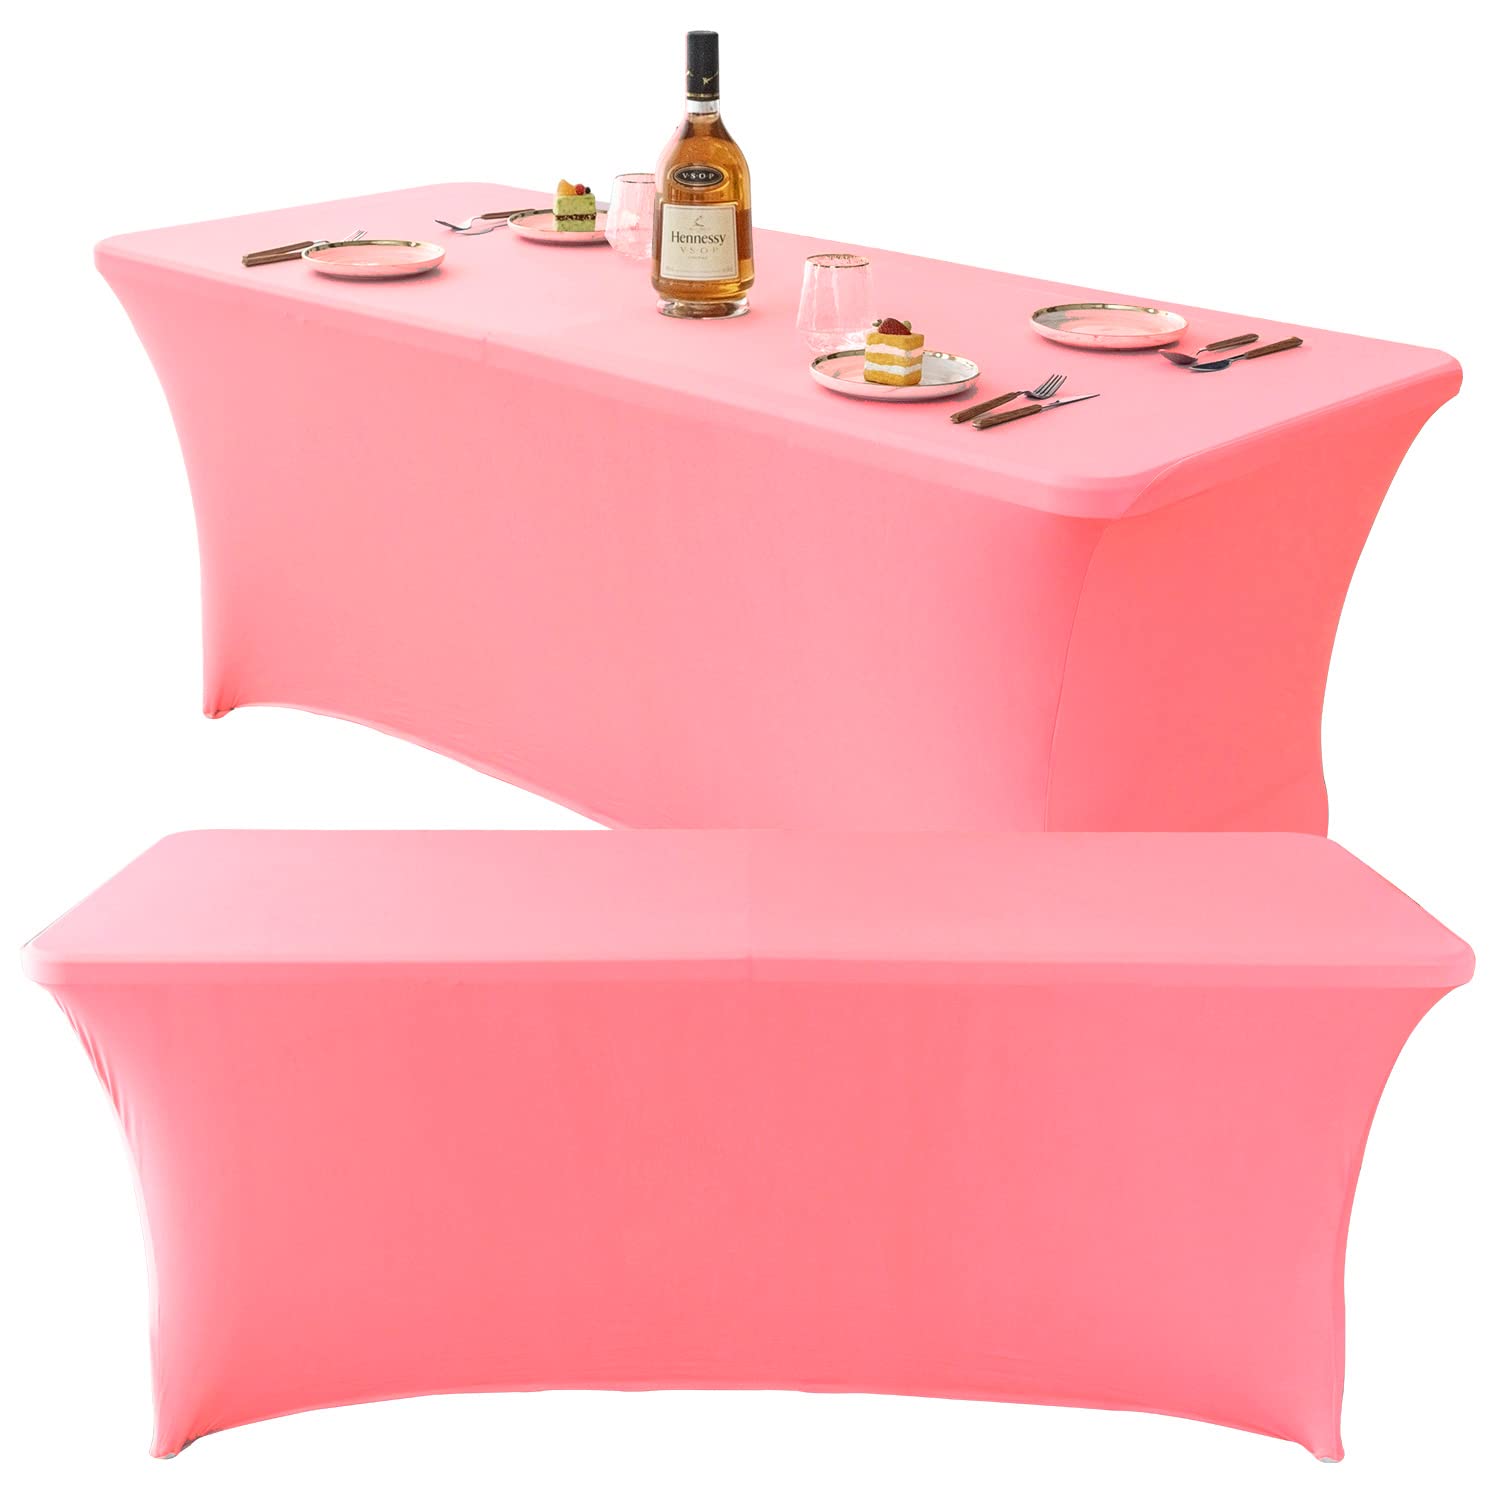 Mingyit 2 Pack Spandex Table cover Fitted Rectangular Tablecloth Stretchable Fabric Tablecloth for Party, Banquet, Wedding and E